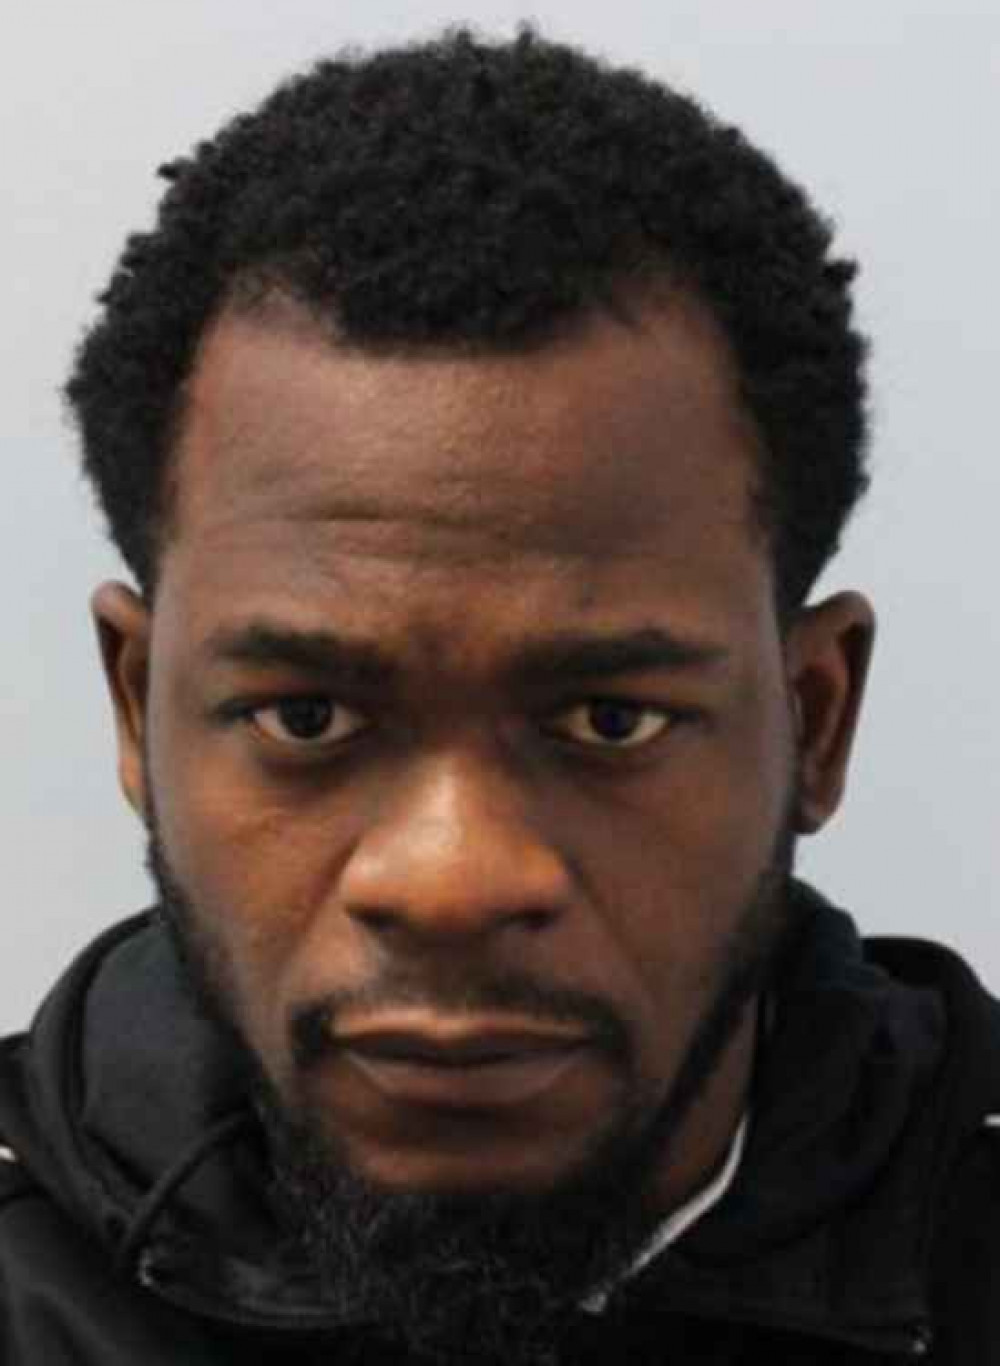 If you have seen Jabari Best, or know of his whereabouts, you're urged to contact the police by calling 101. Image Credit: Ealing Police